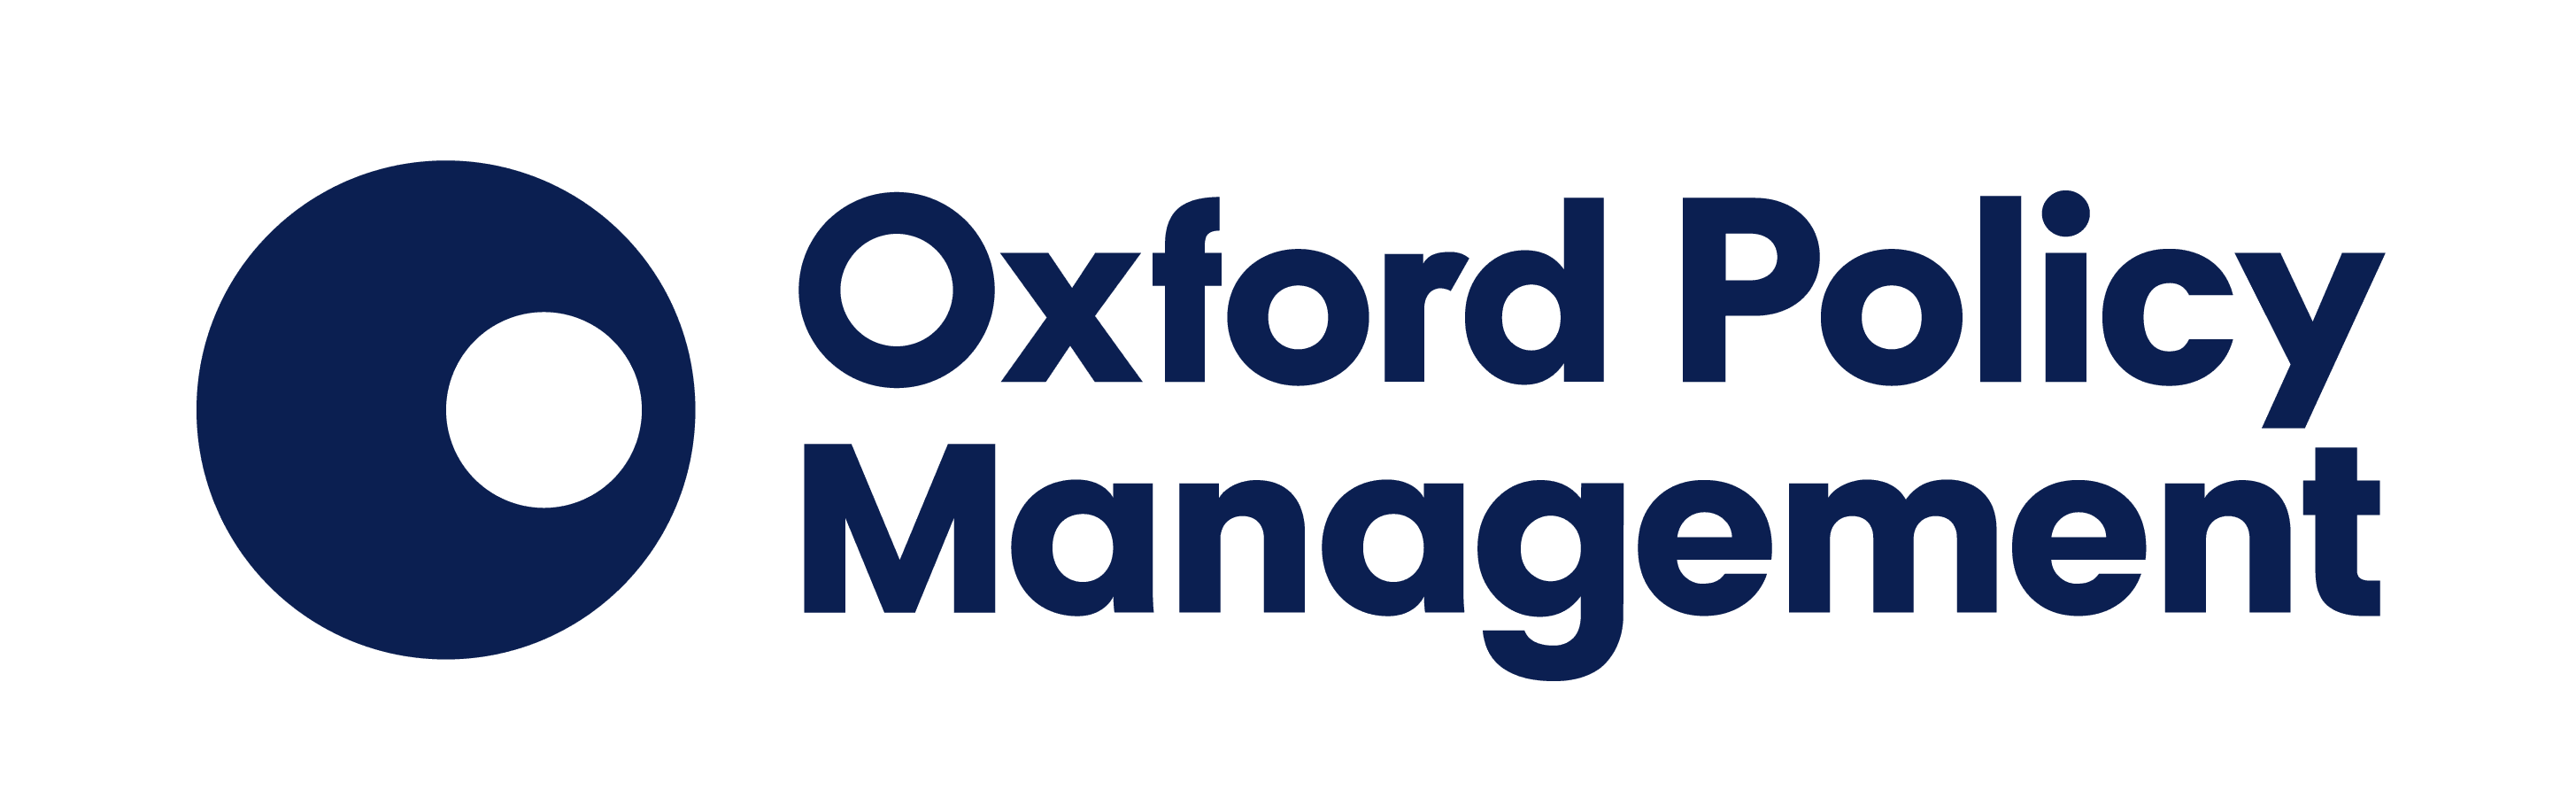 Oxford Policy Management + logo